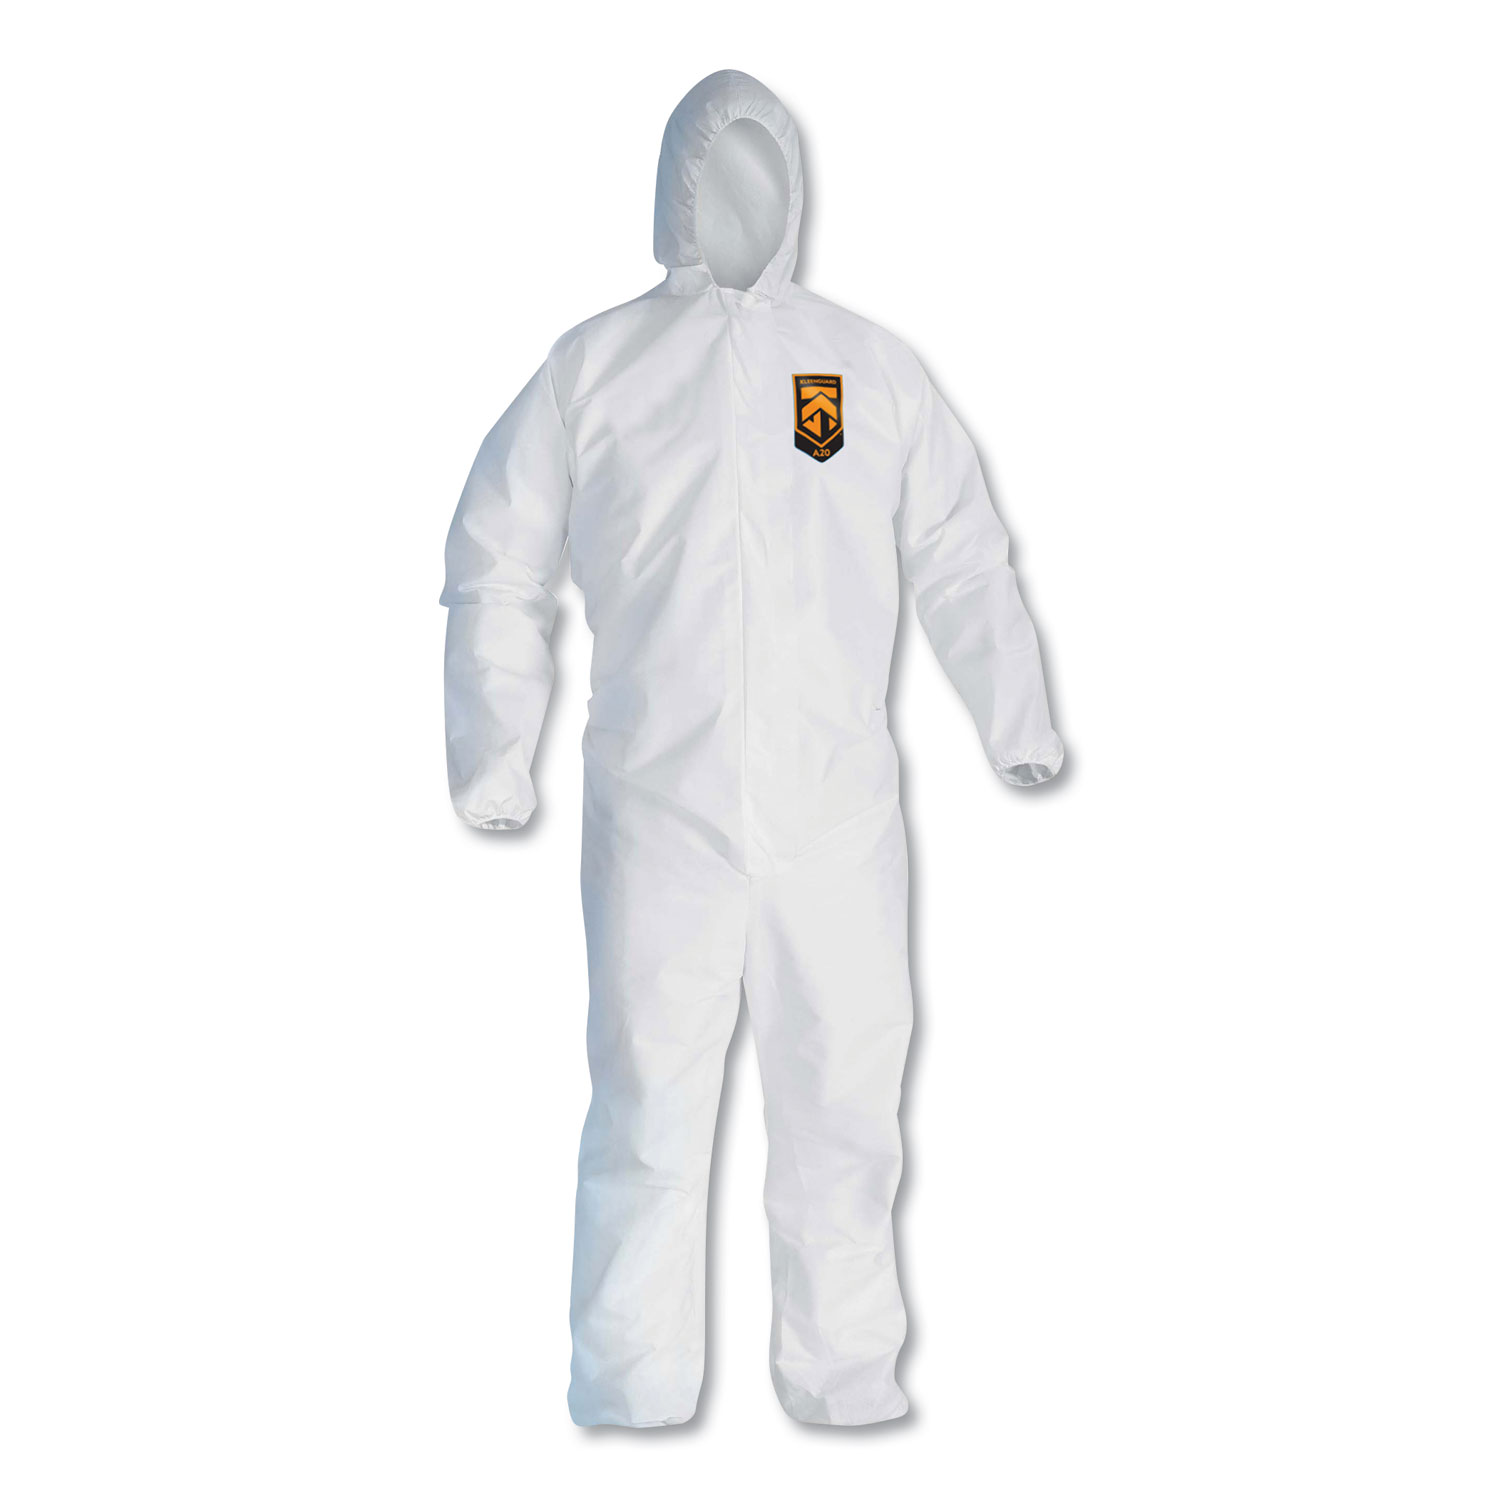  KleenGuard 49116 A20 Breathable Particle Protection Coveralls, Zip Closure, 3X-Large, White (KCC49116) 